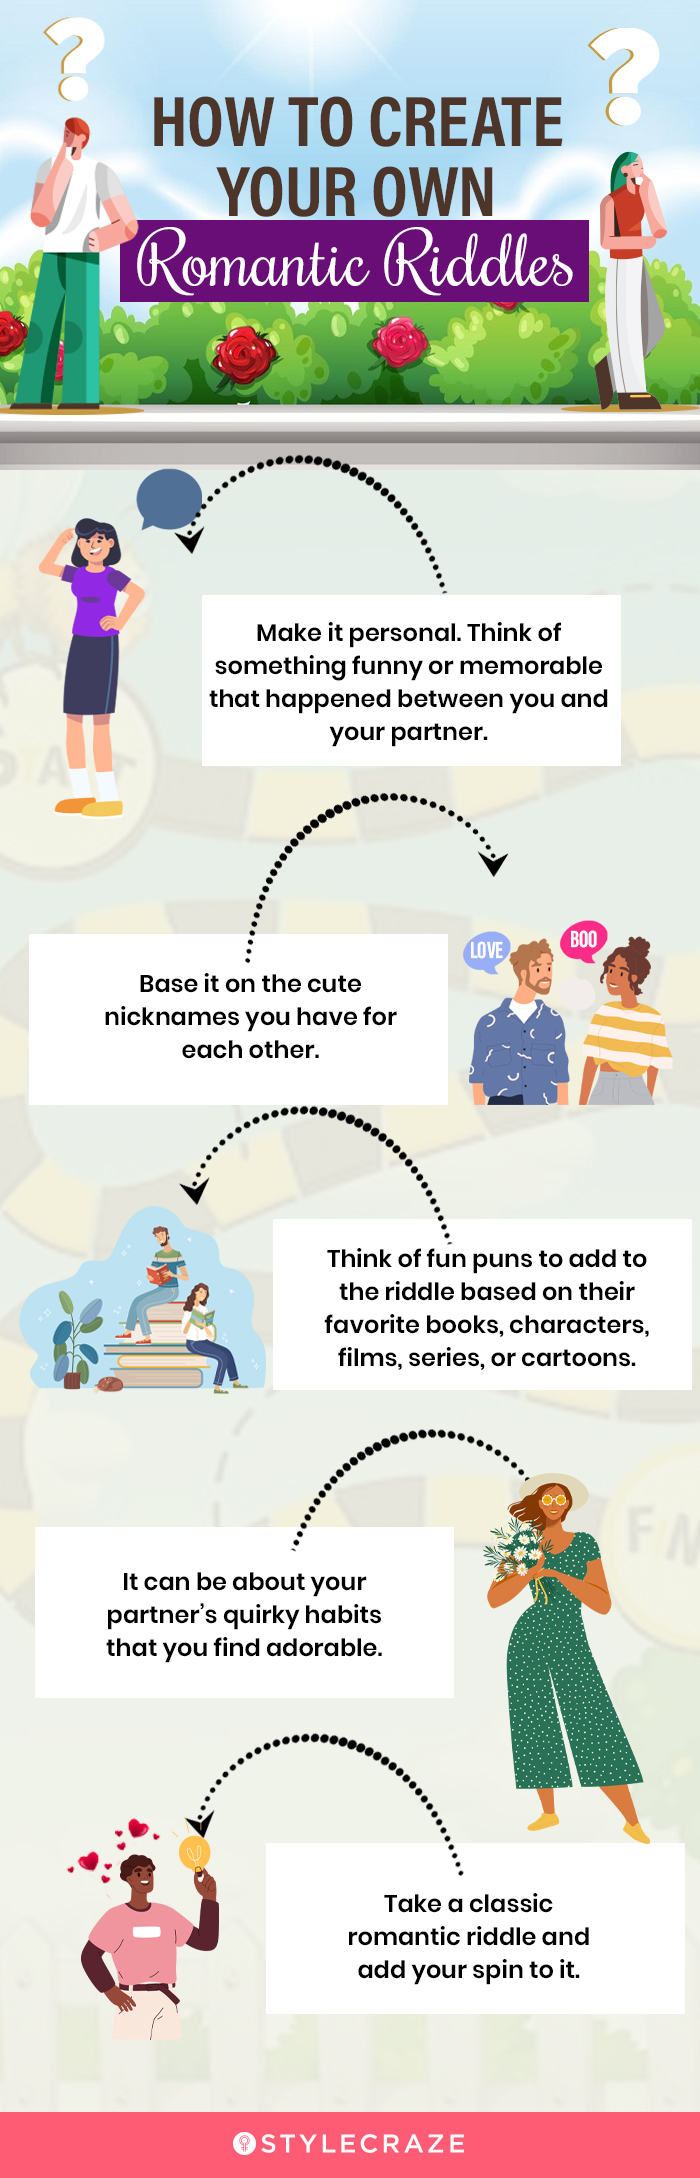 how to create your own romantic riddles (infographic)